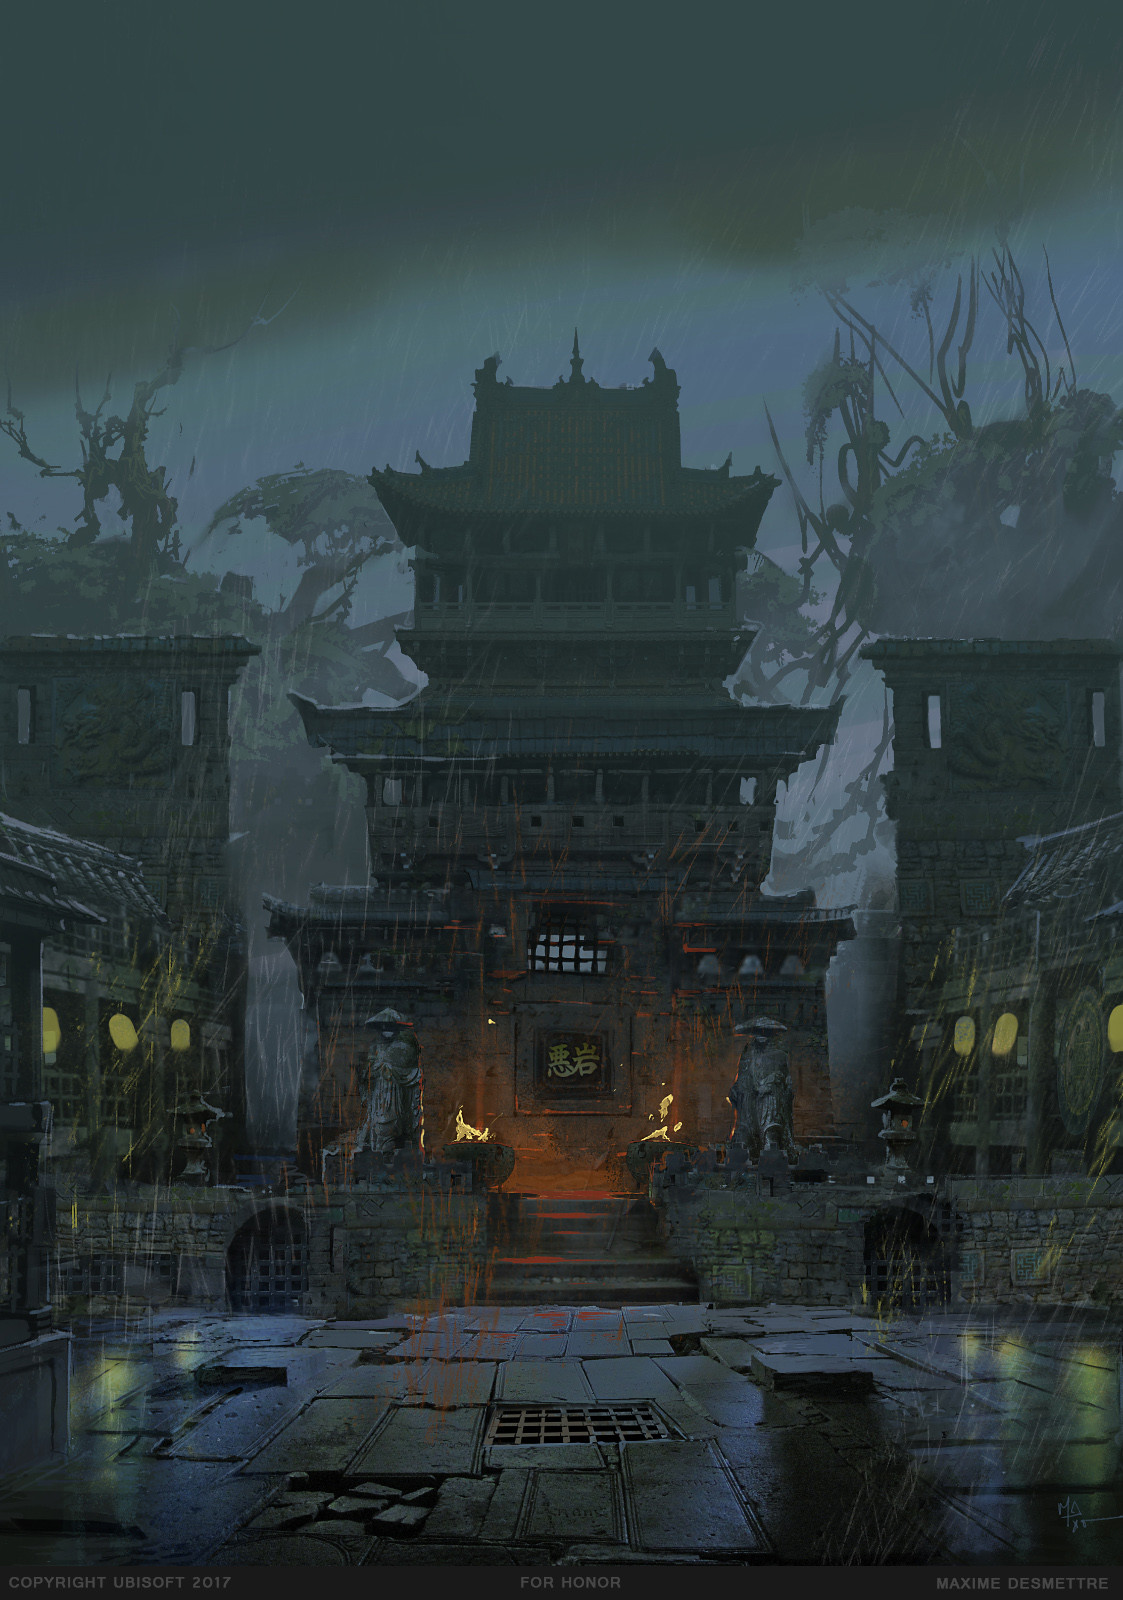 For Honor : Fighting Arena environment study (2015)
Photoshop